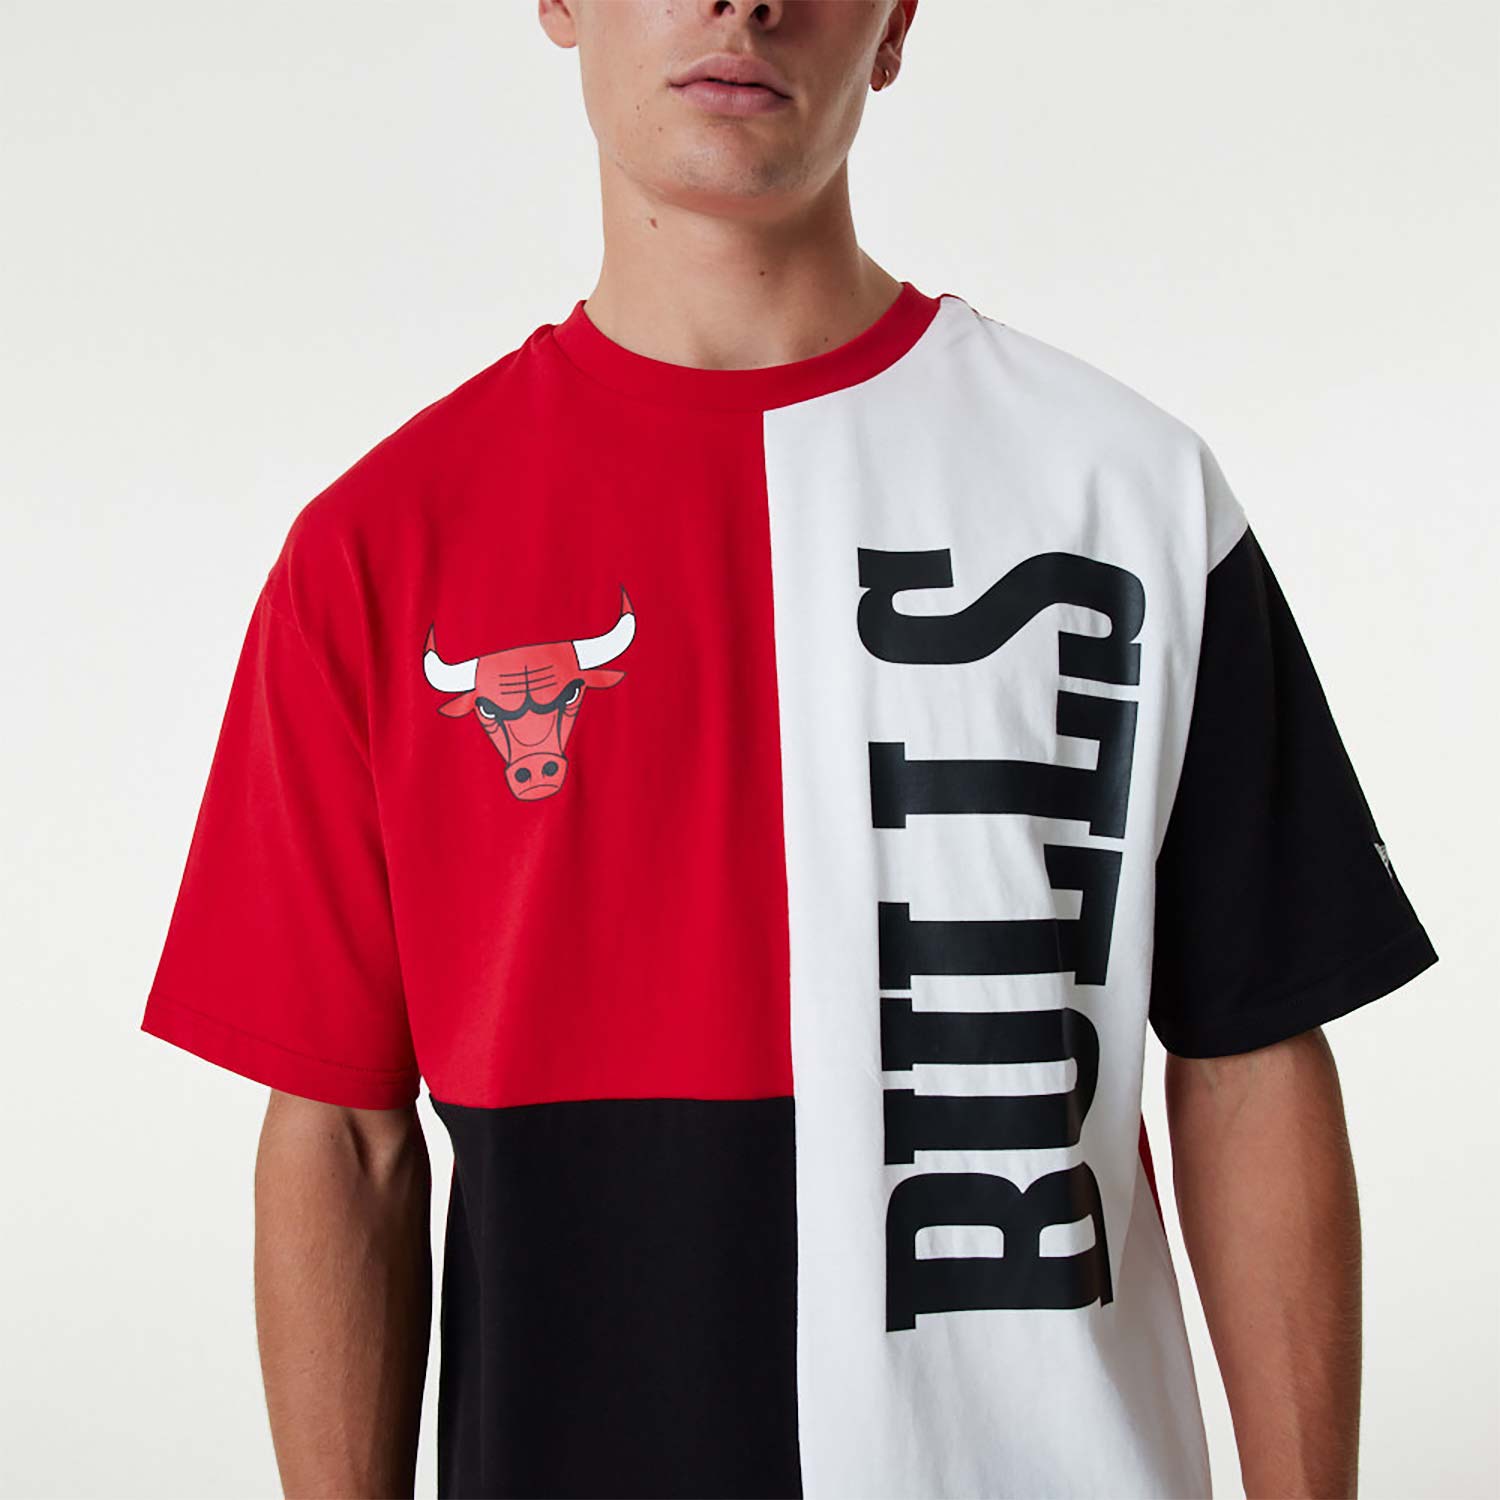 Chicago Bulls NBA Cut And Sew Red Oversized T-Shirt